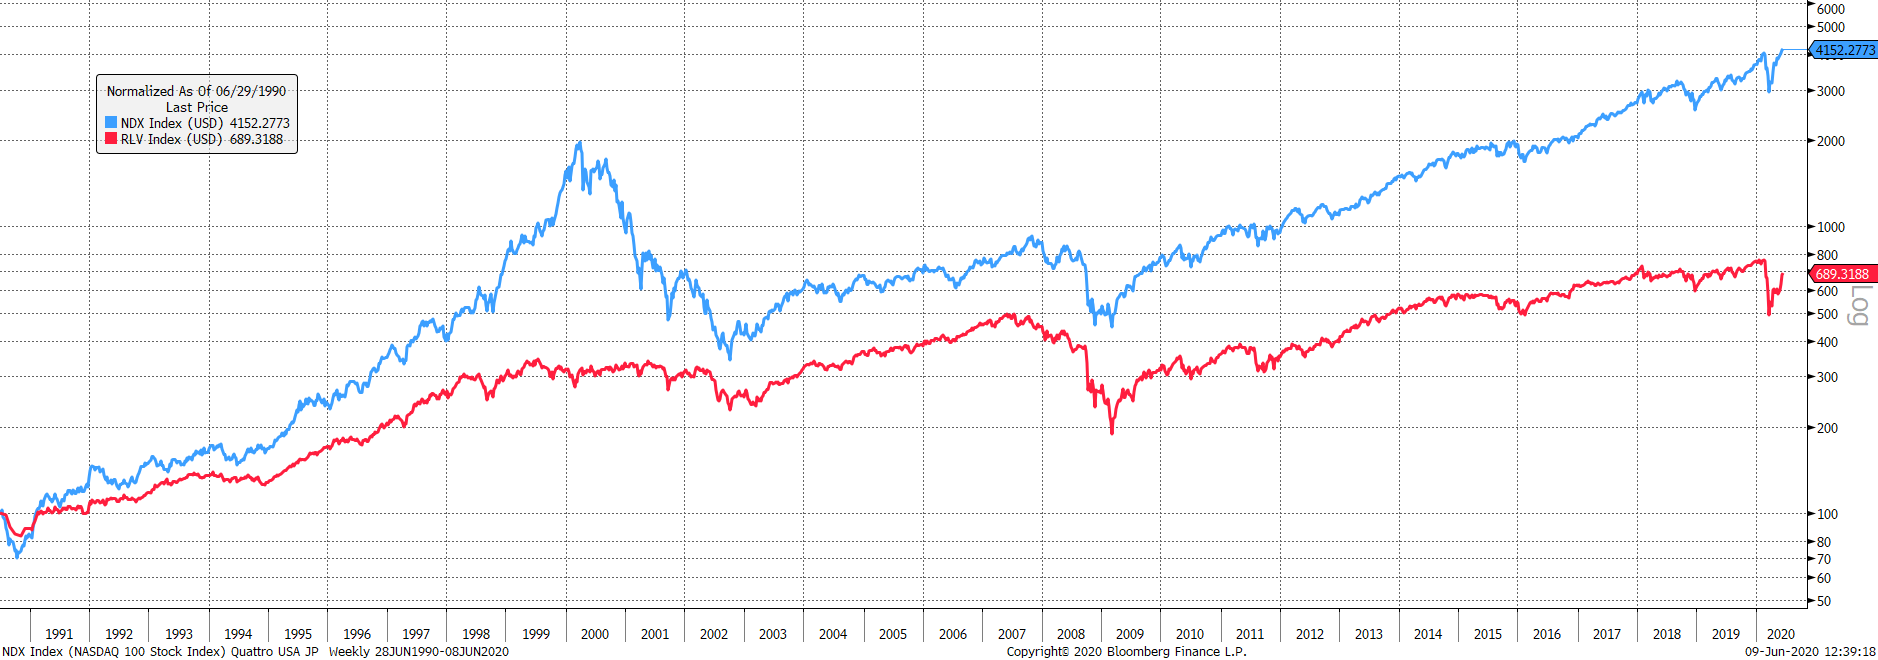 Source: Bloomberg. Nasdaq (blue) and the Russell 1000 value (red) capital return since 1990 rebased to 100.